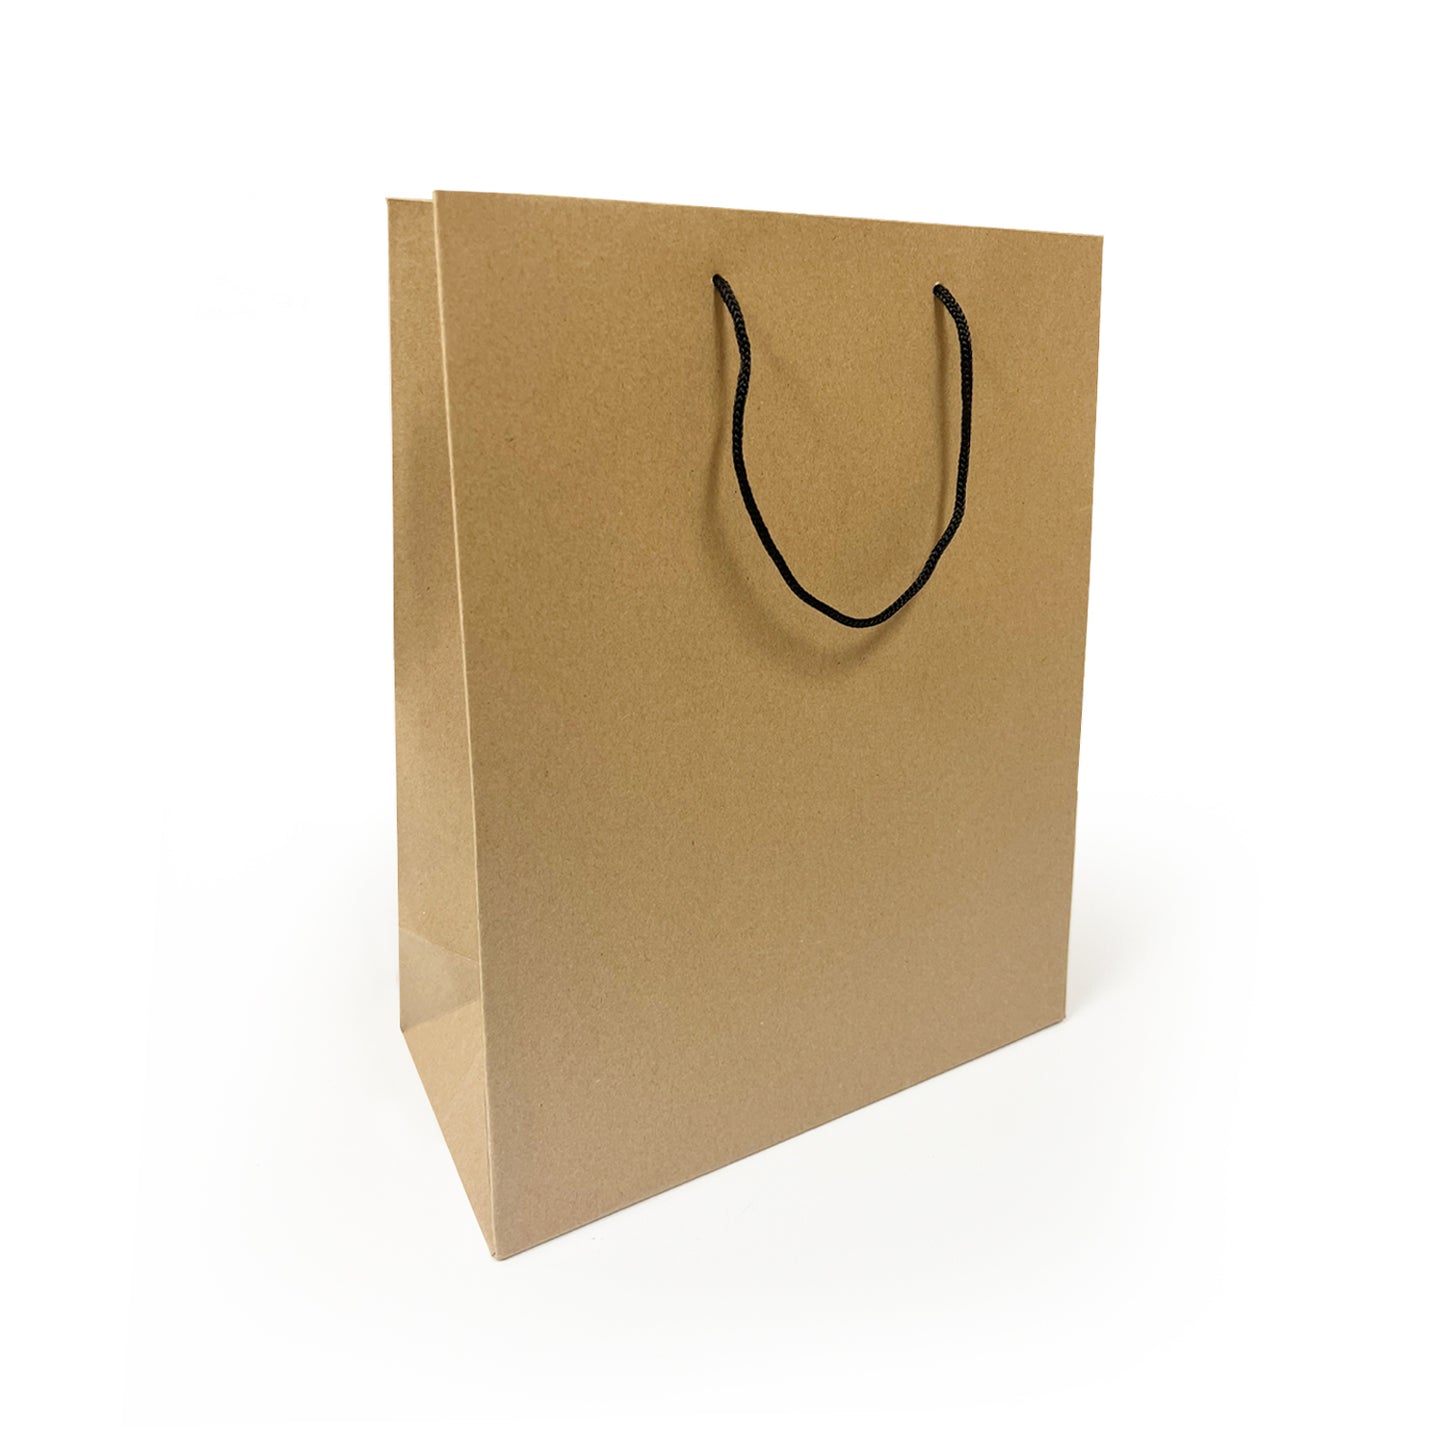 150 Pcs, Debbie, 10x5x13 inches, Euro Tote Paper Bags, with Rope Handle